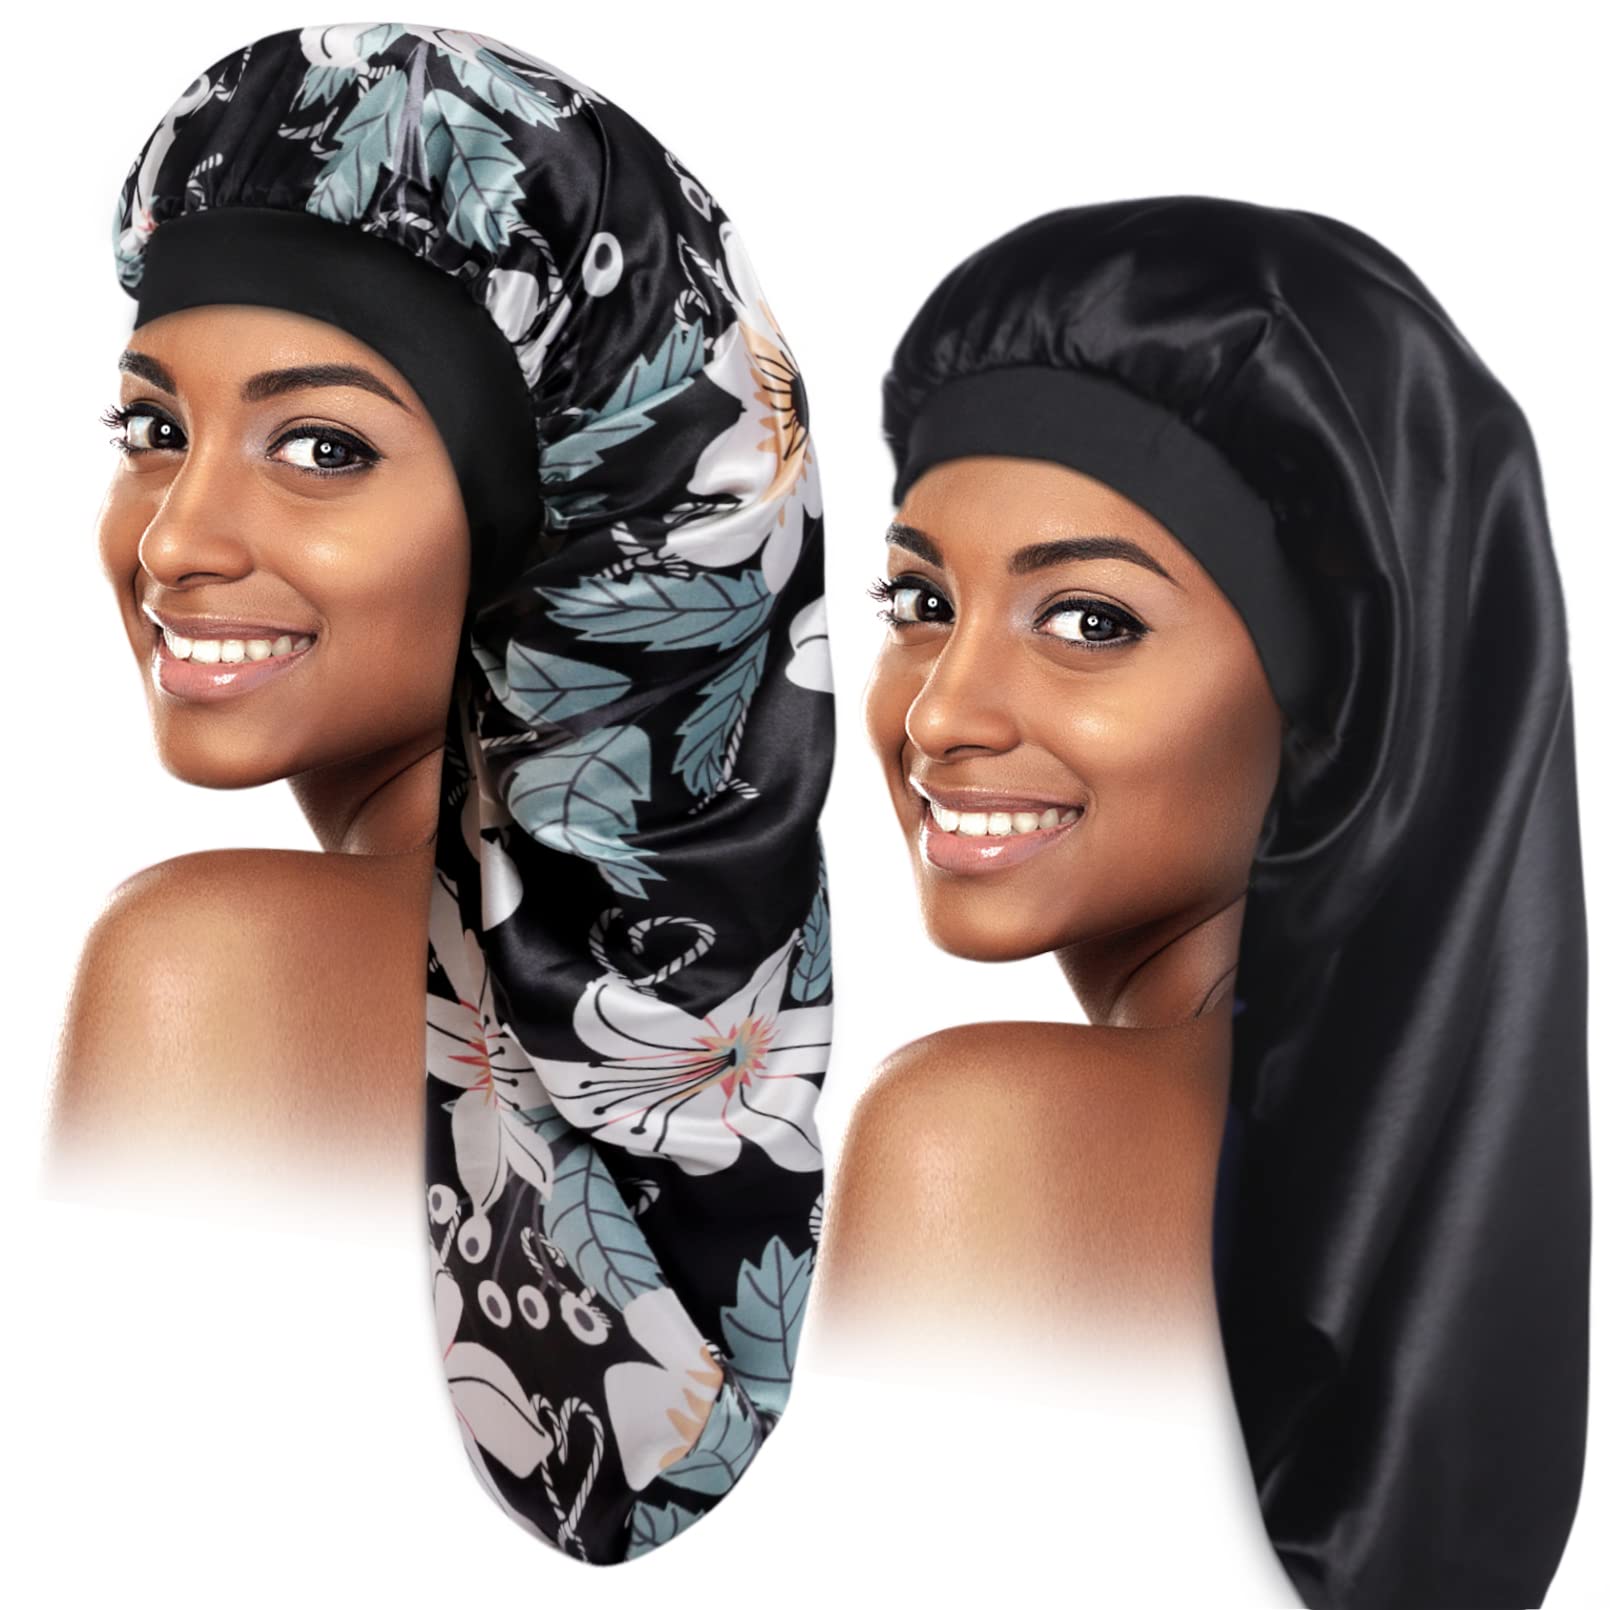  Silk Bonnet for Sleeping Black Women Sleep Cap Satin Bonnet  for Curly Hair for Men Night Head Cover/Wrap Scarf Protect Braids : Beauty  & Personal Care